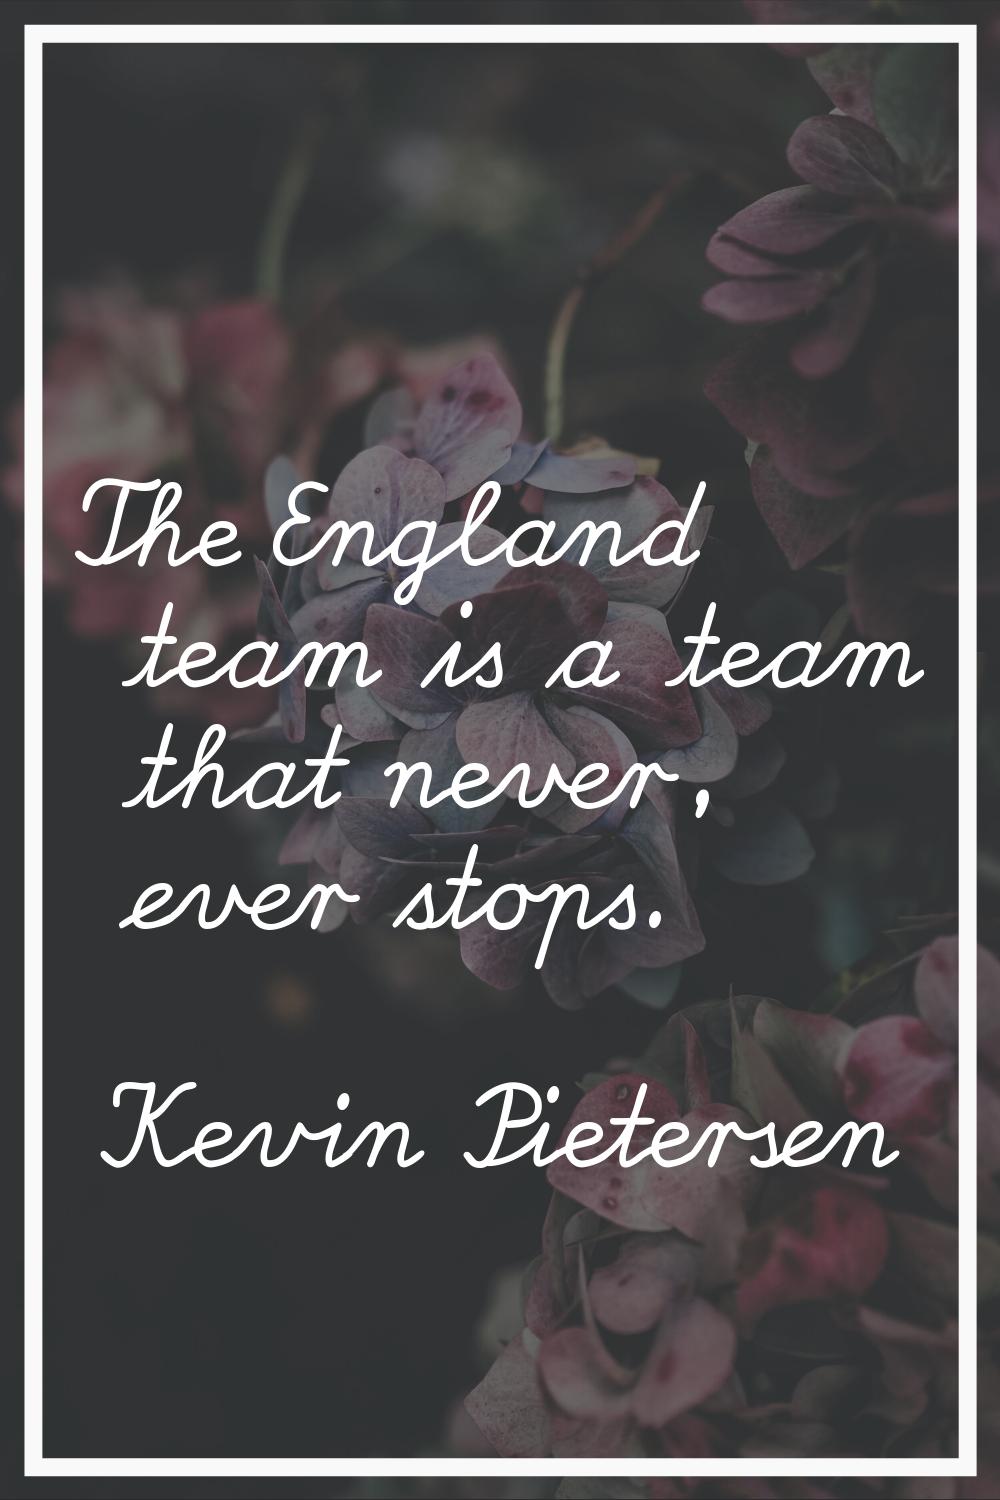 The England team is a team that never, ever stops.